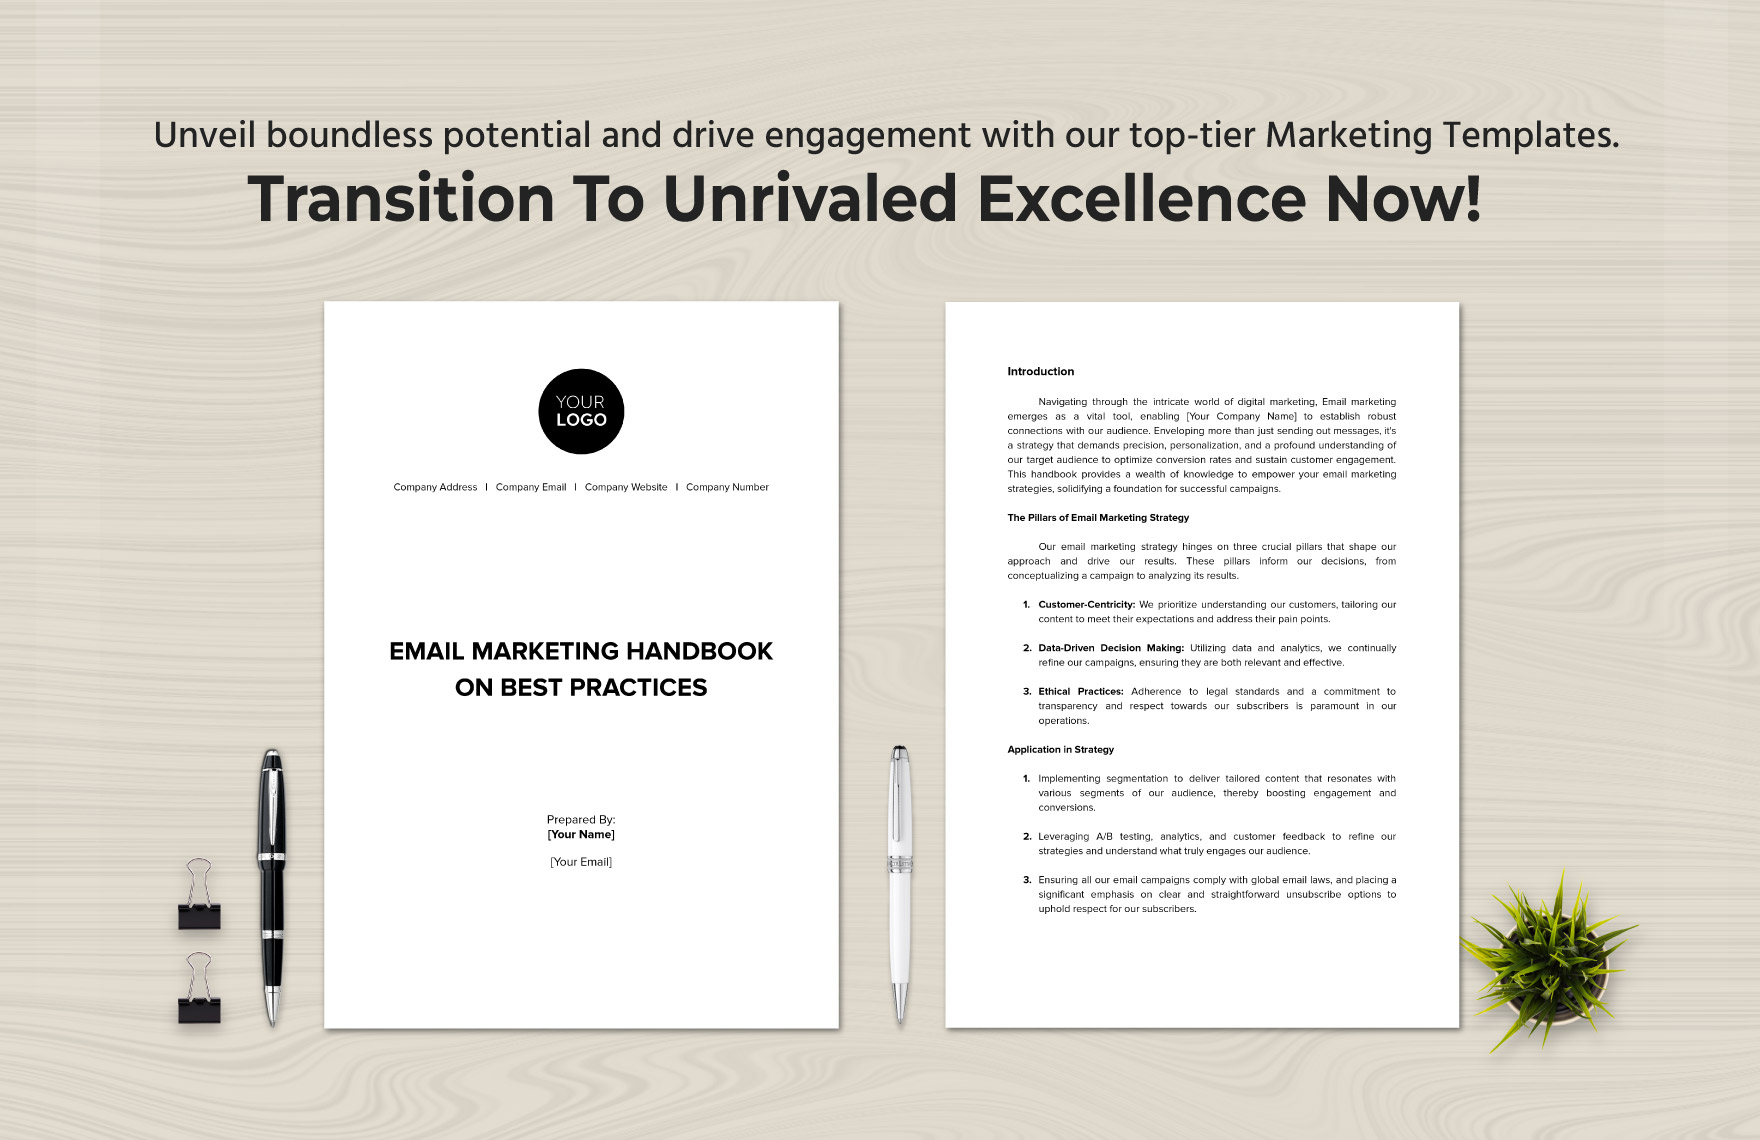 Email Marketing Handbook on Best Practices Template